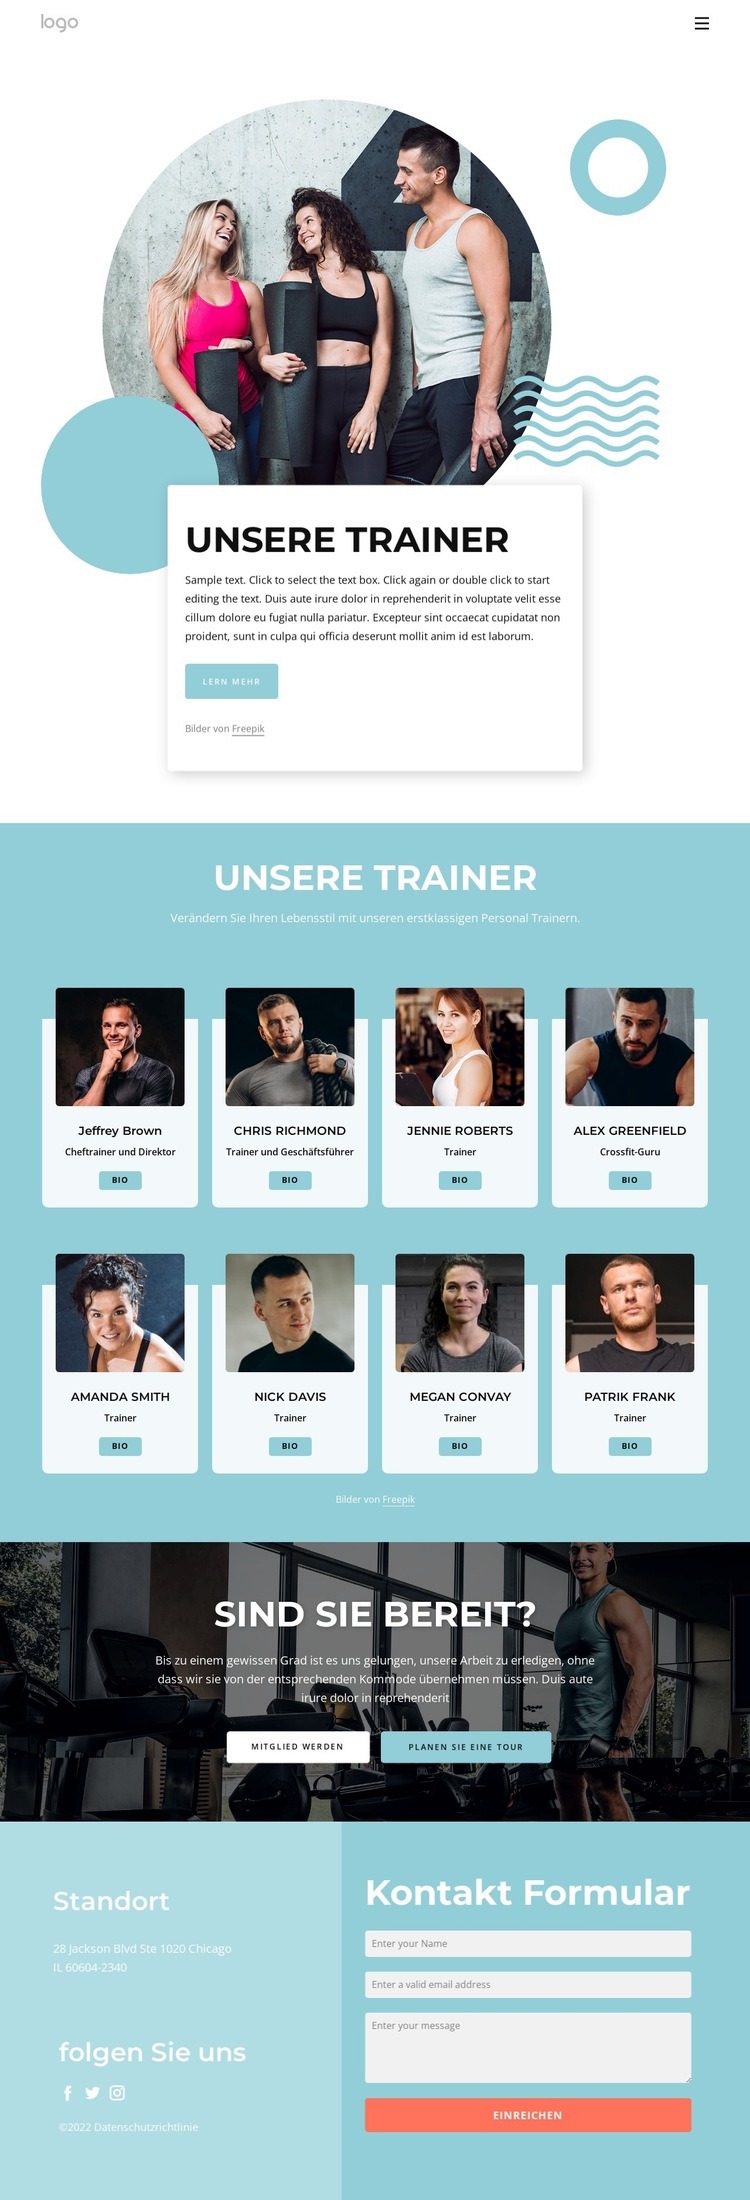 Unsere Trainer Website-Modell